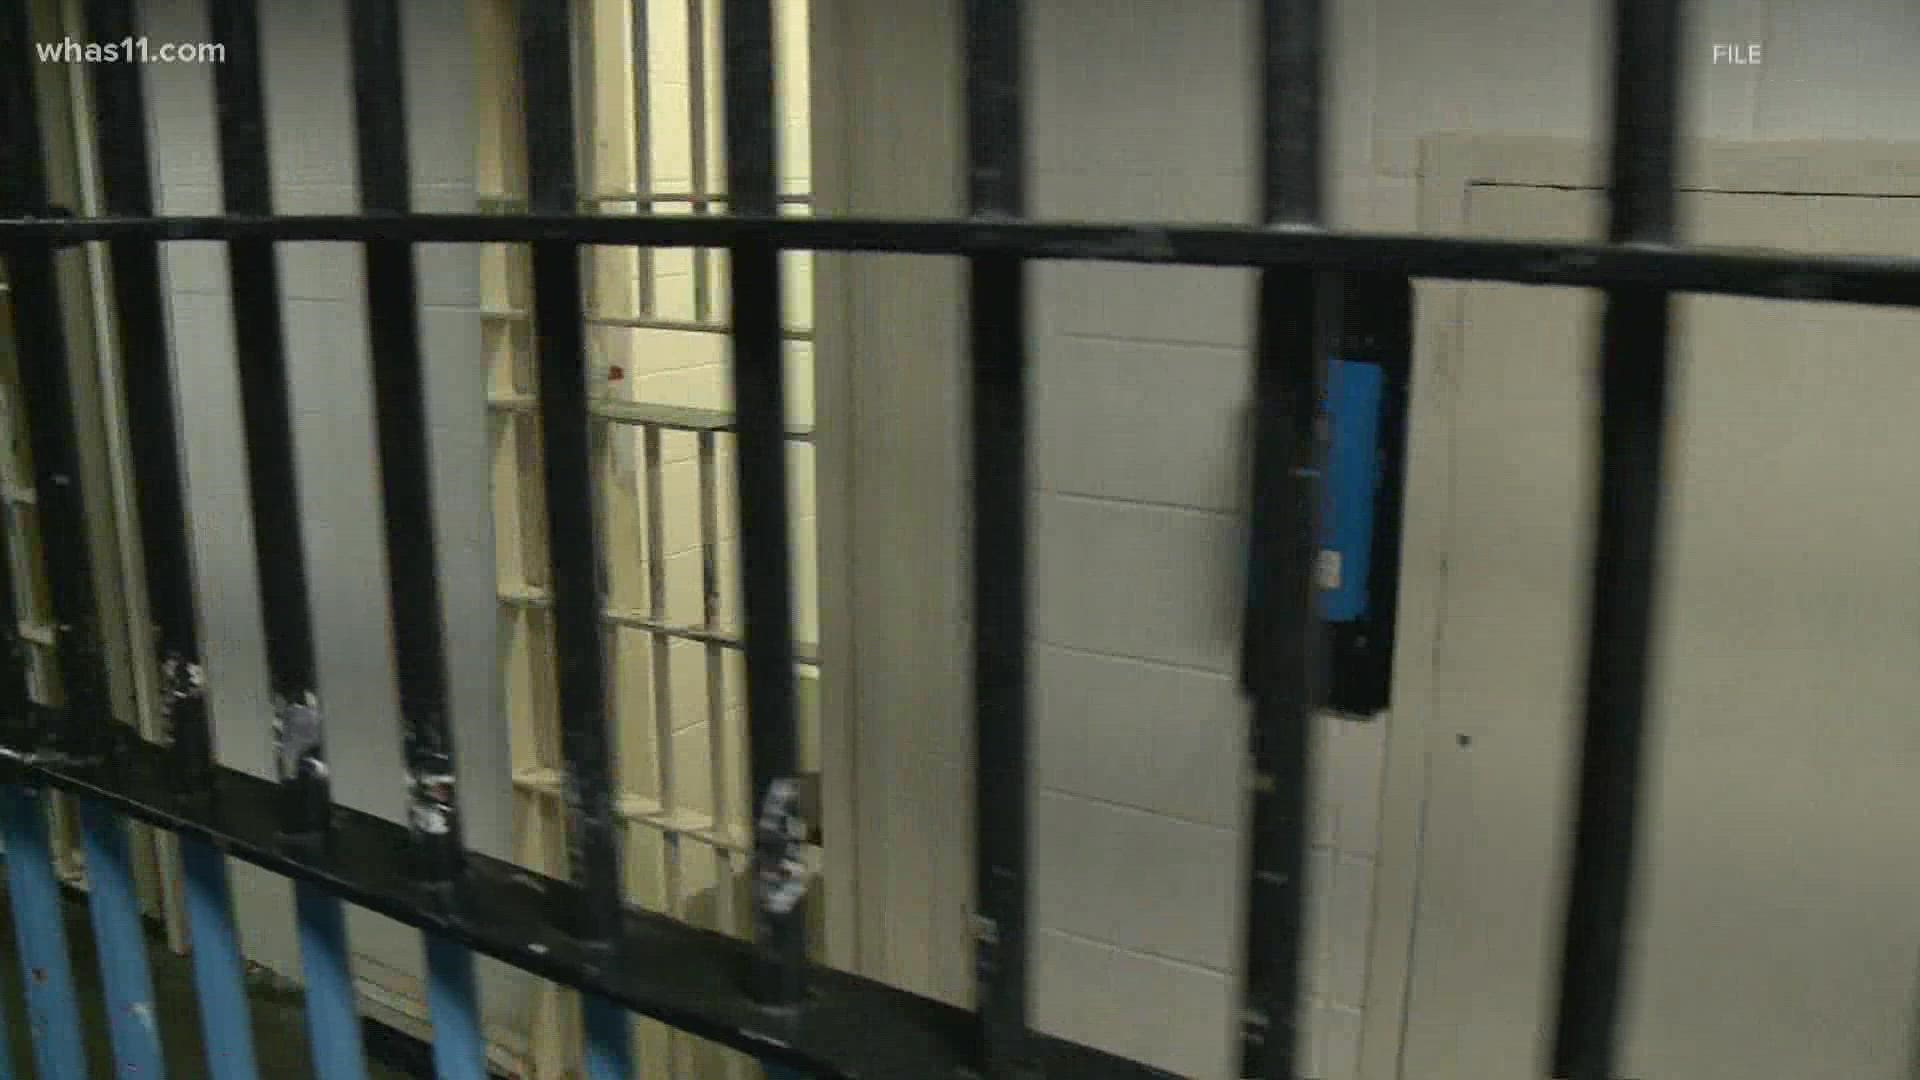 Jail officials said the 48-year-old woman died by suicide sometime on Saturday.